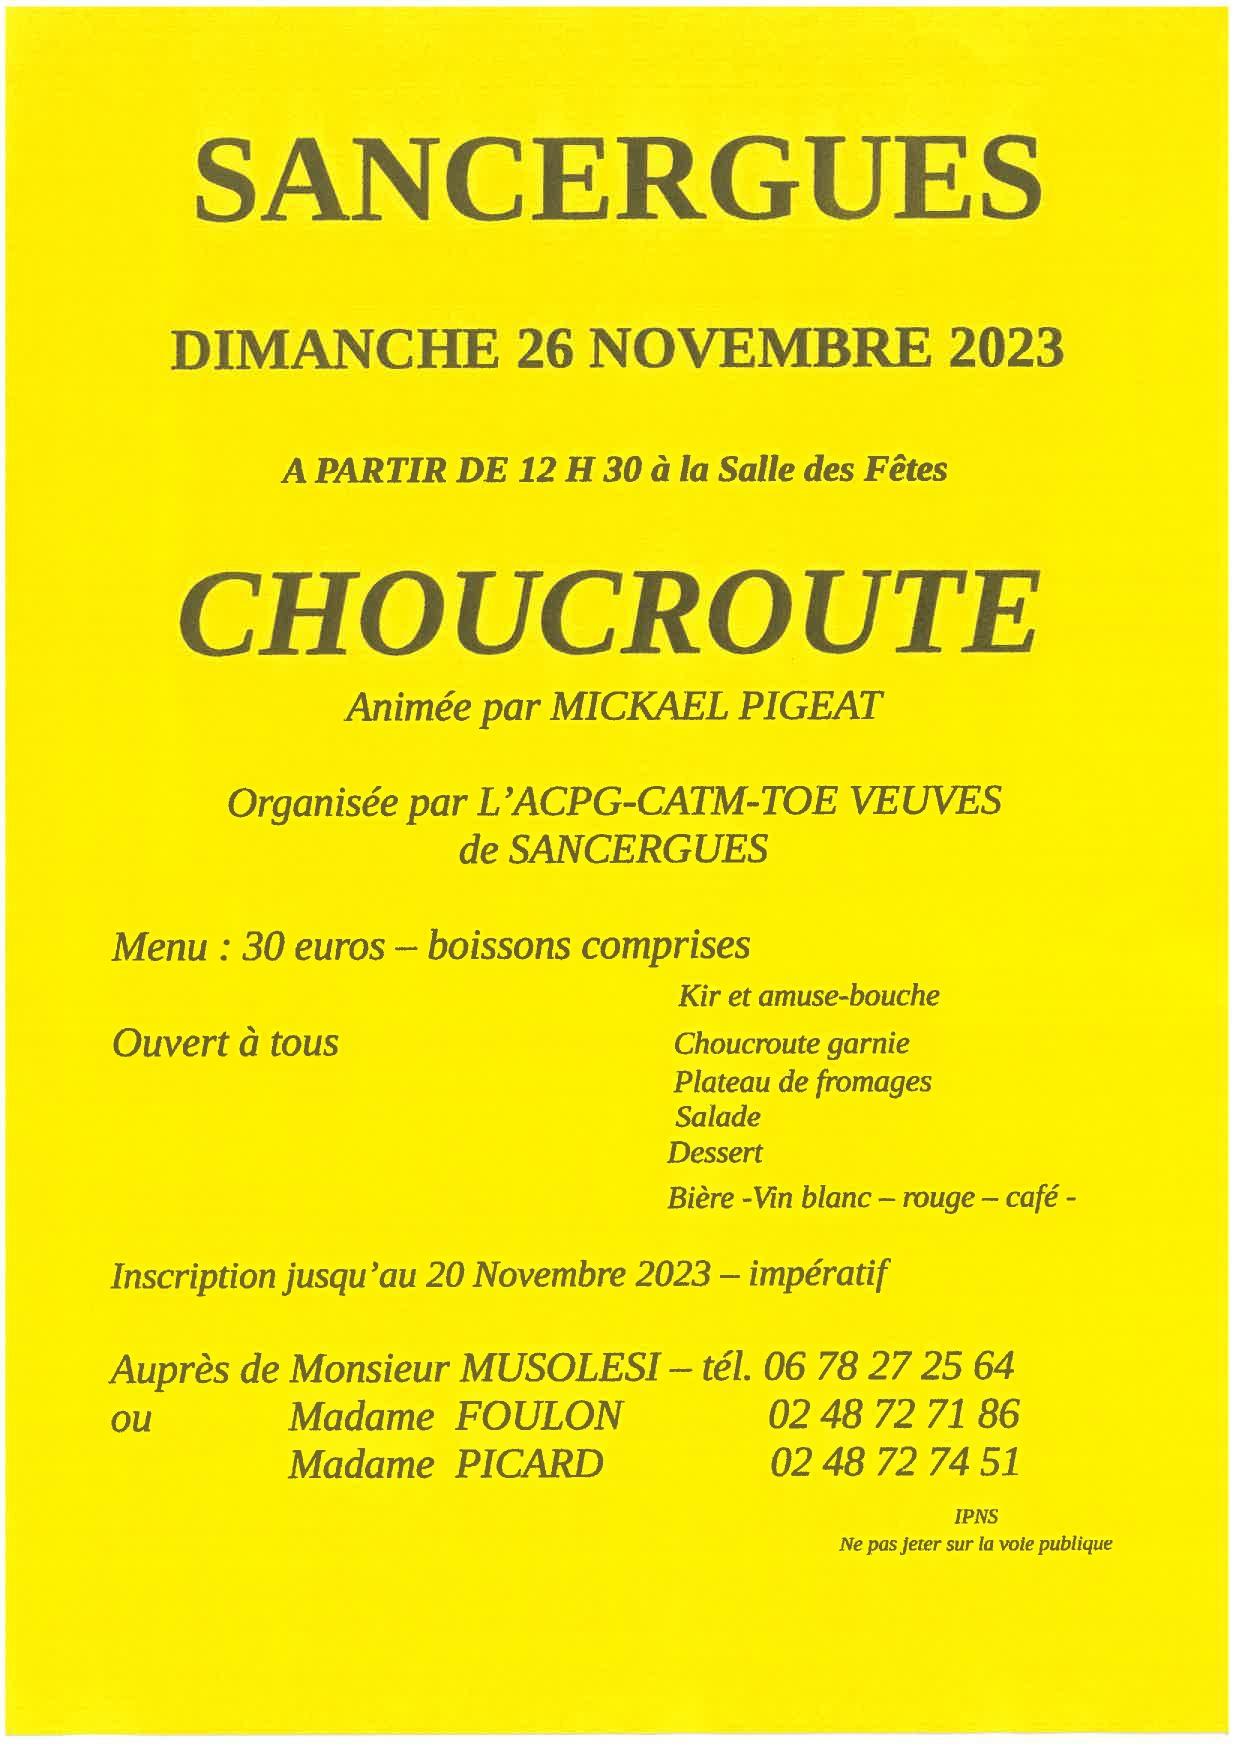 Soiree choucroute 26 11 2023